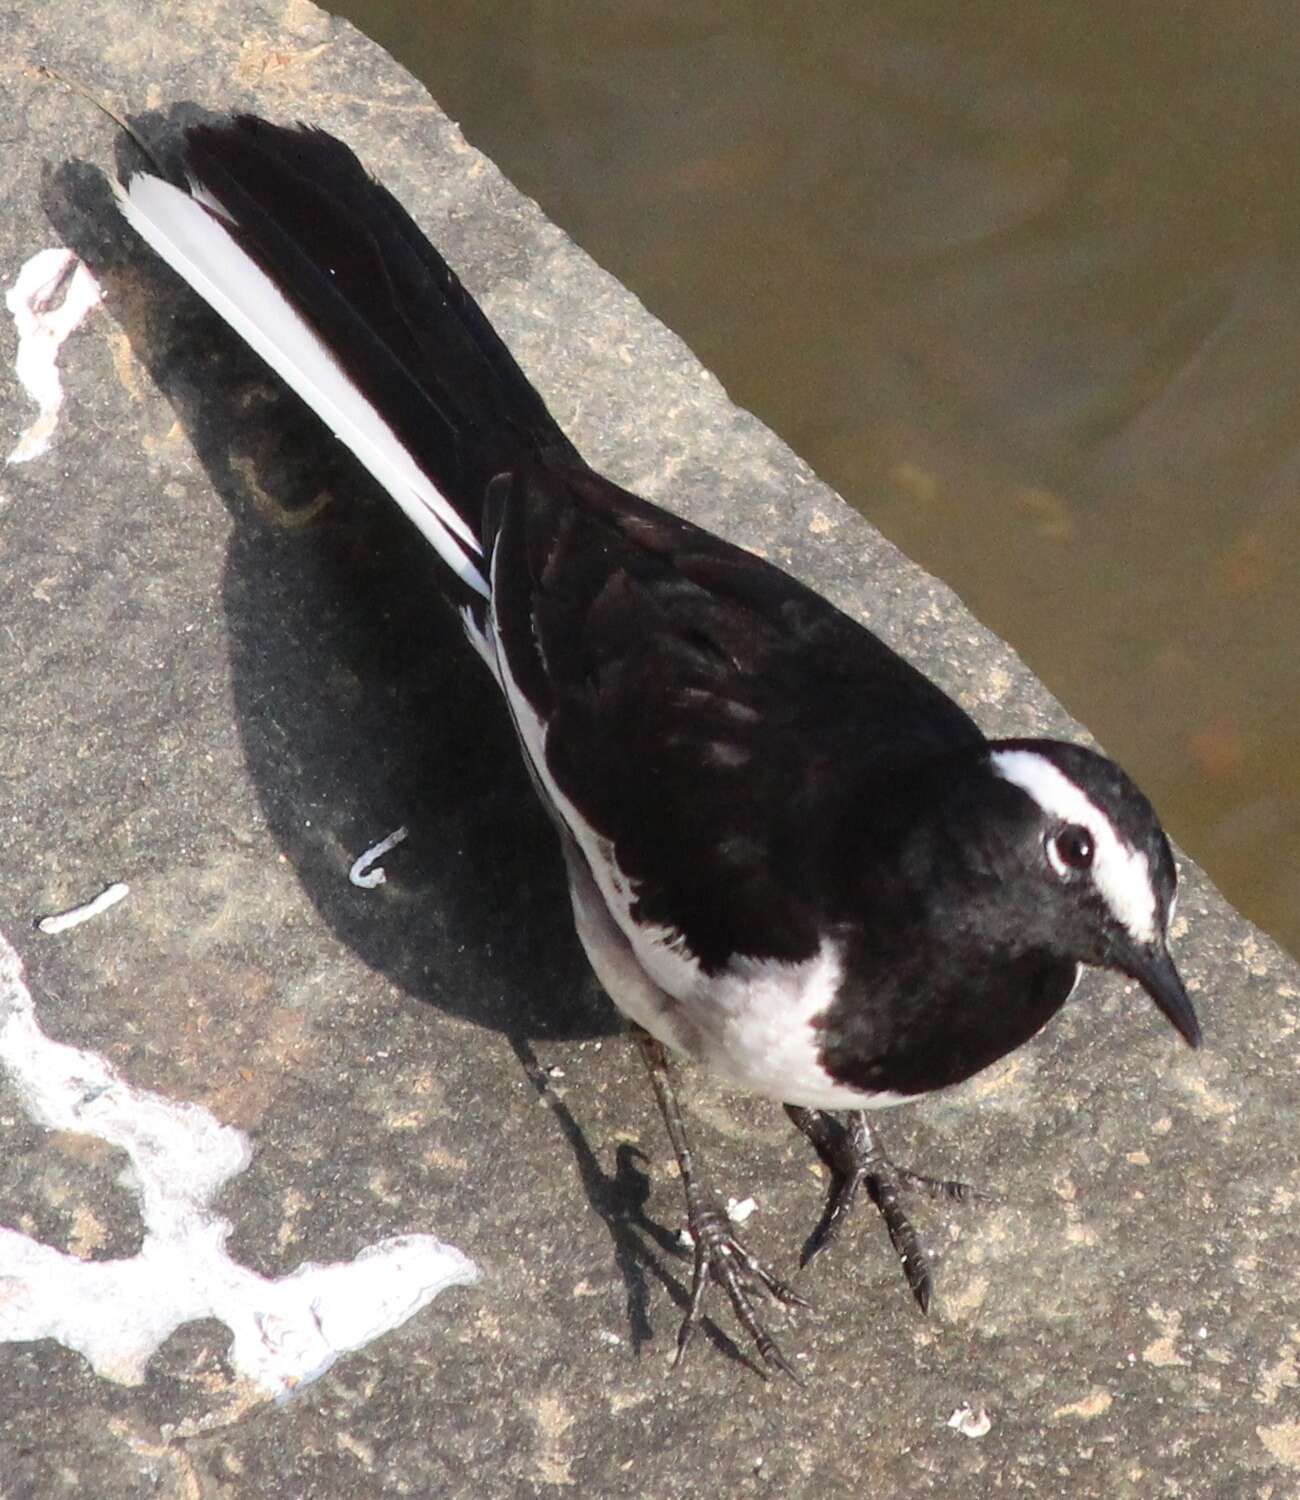 Image of White-browed Wagtail